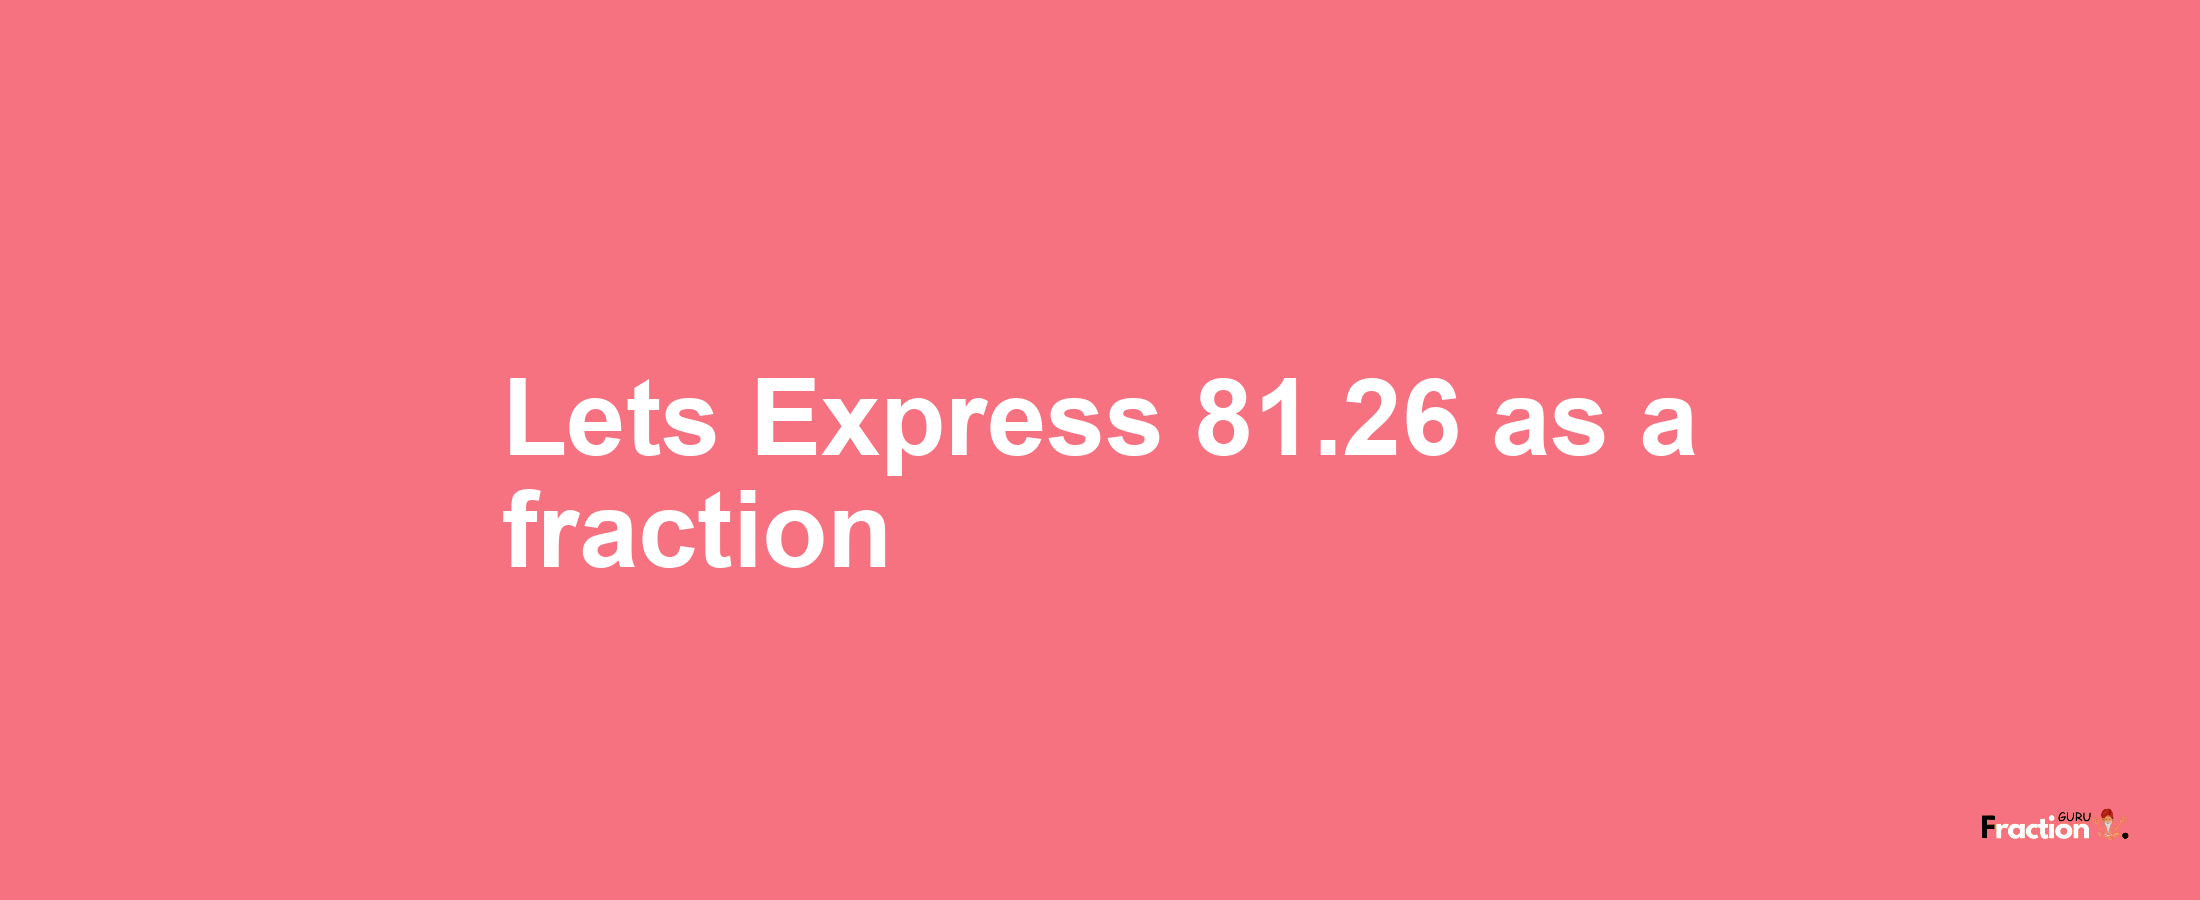 Lets Express 81.26 as afraction